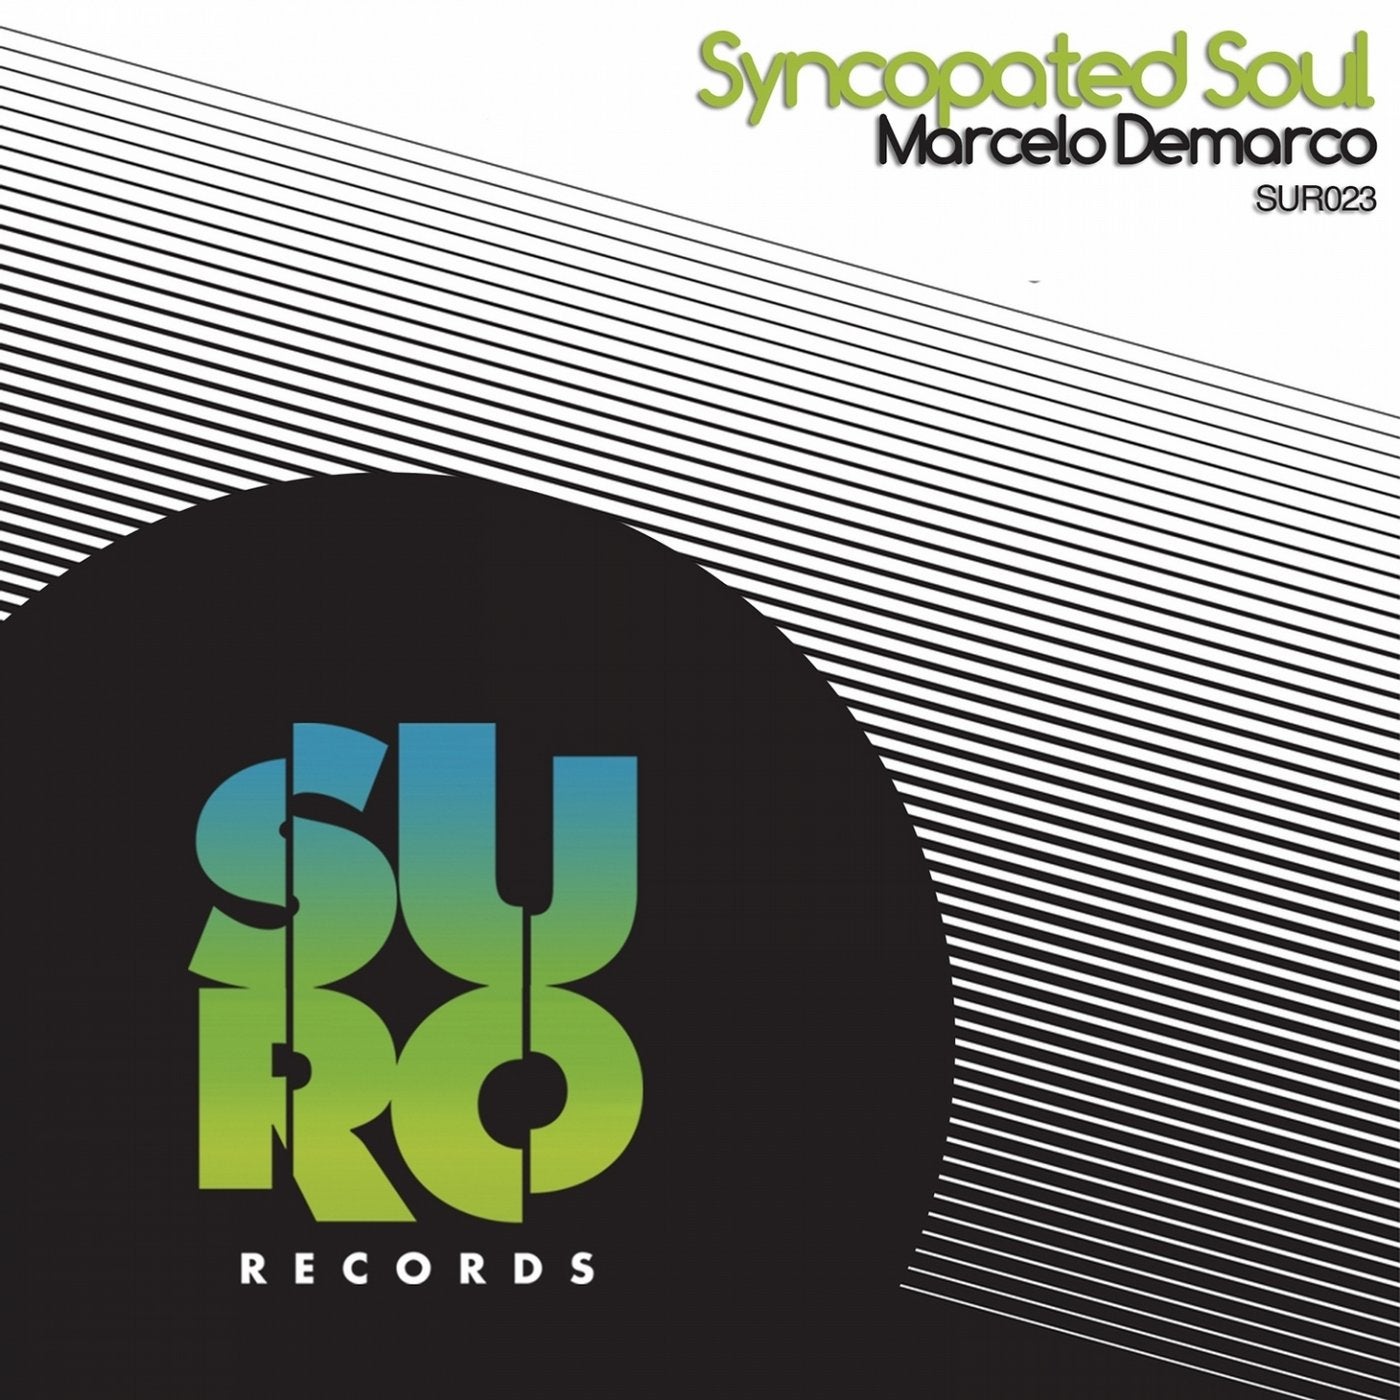 Syncopated Soul